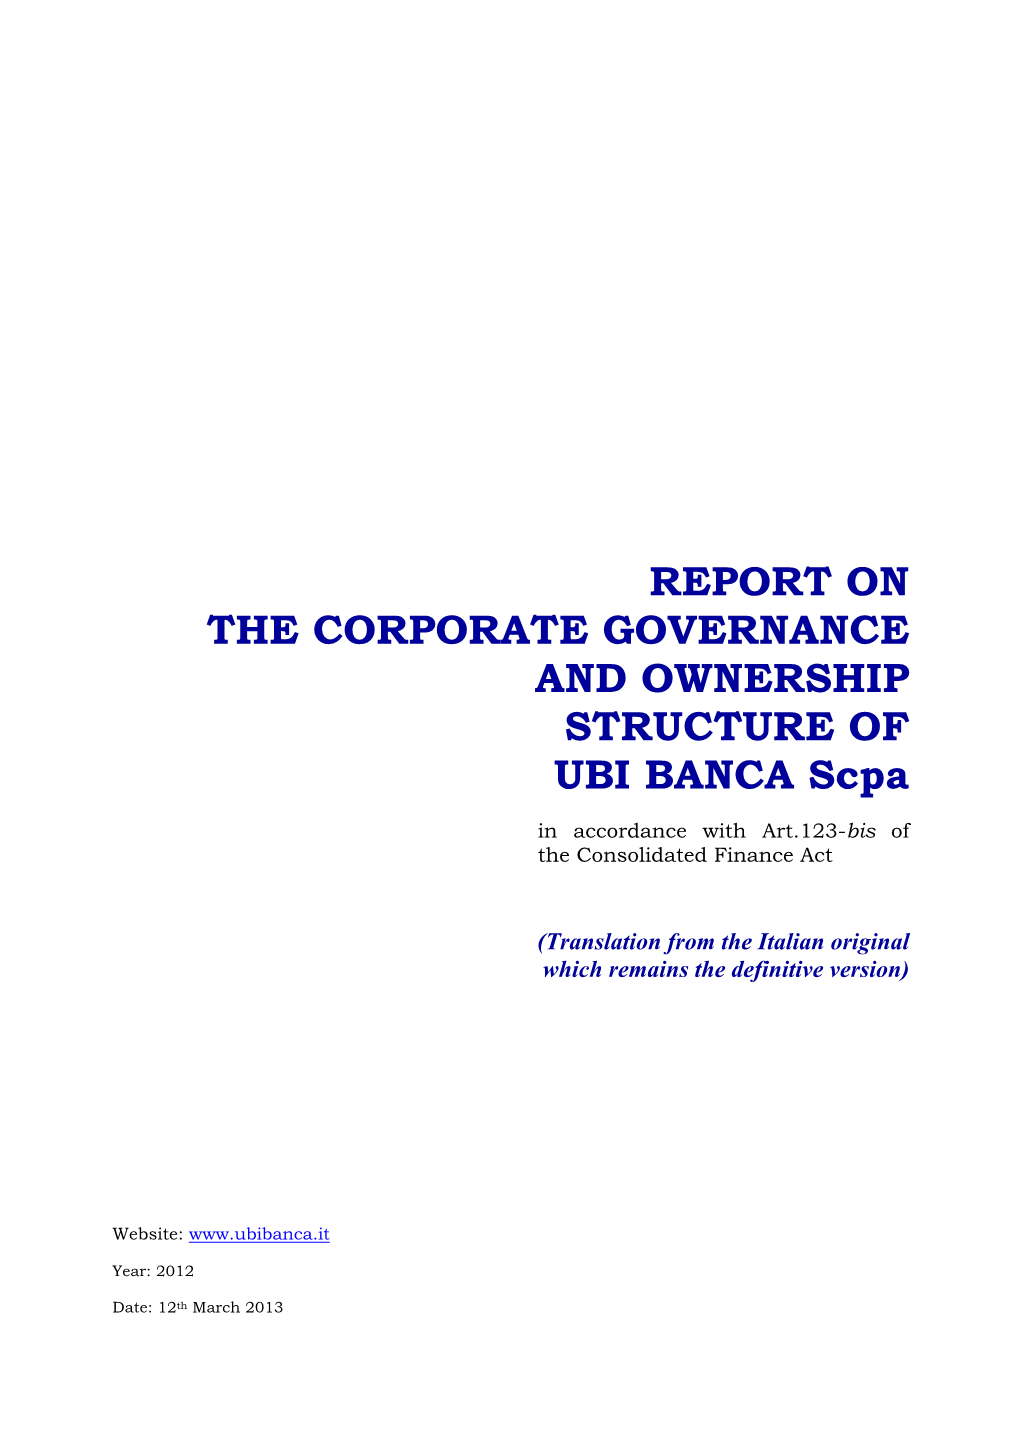 REPORT on the CORPORATE GOVERNANCE and OWNERSHIP STRUCTURE of UBI BANCA Scpa